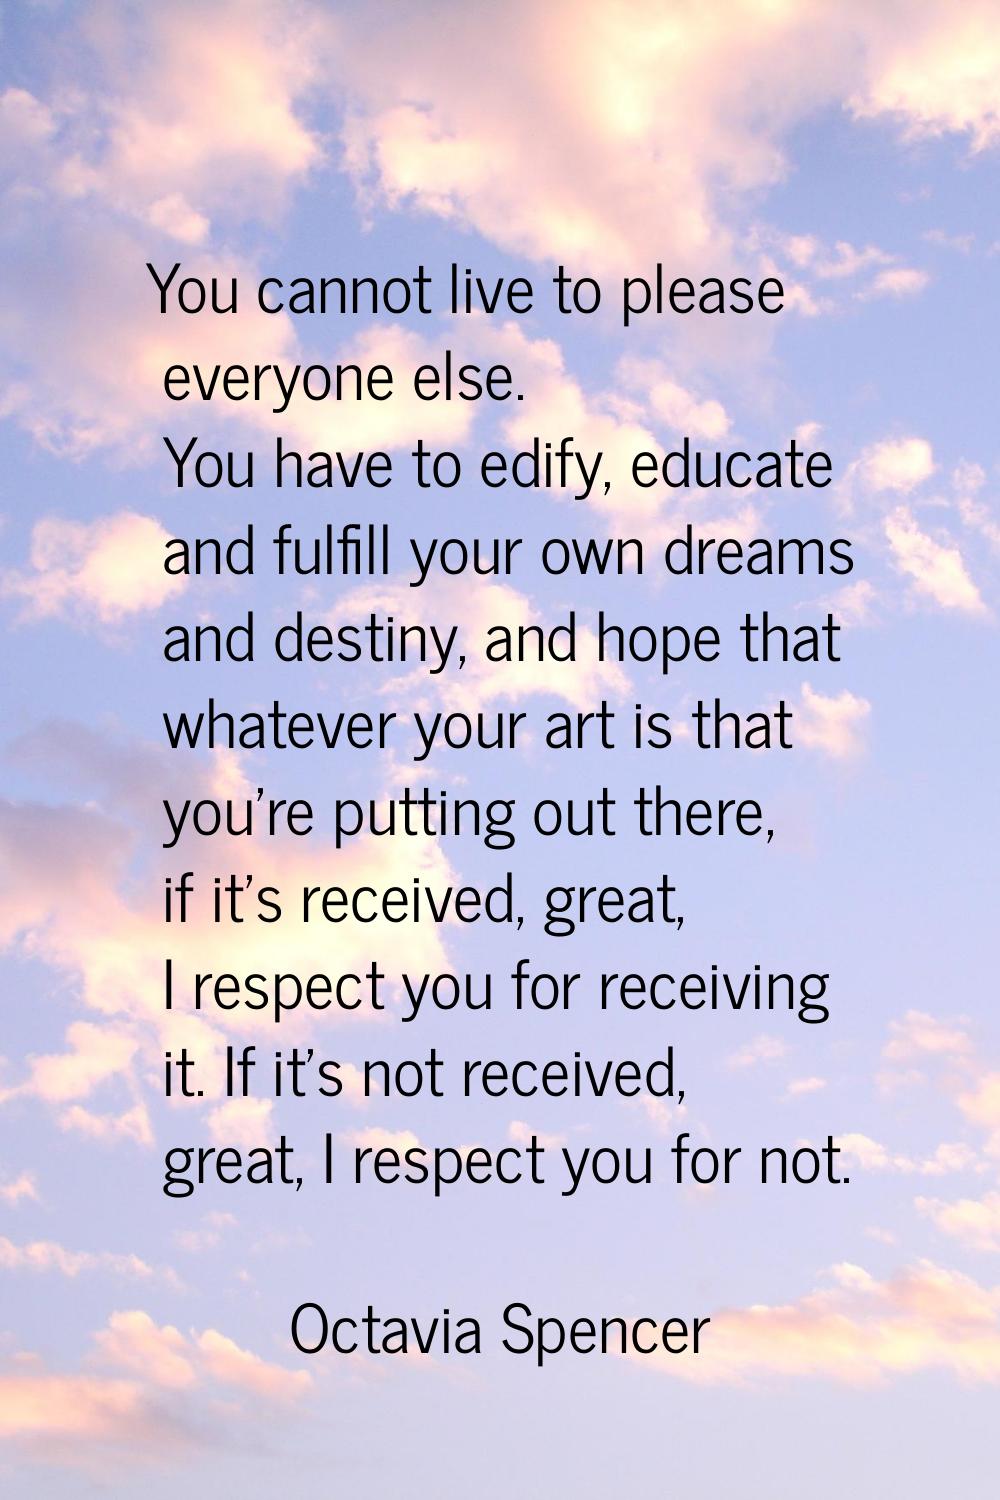 You cannot live to please everyone else. You have to edify, educate and fulfill your own dreams and